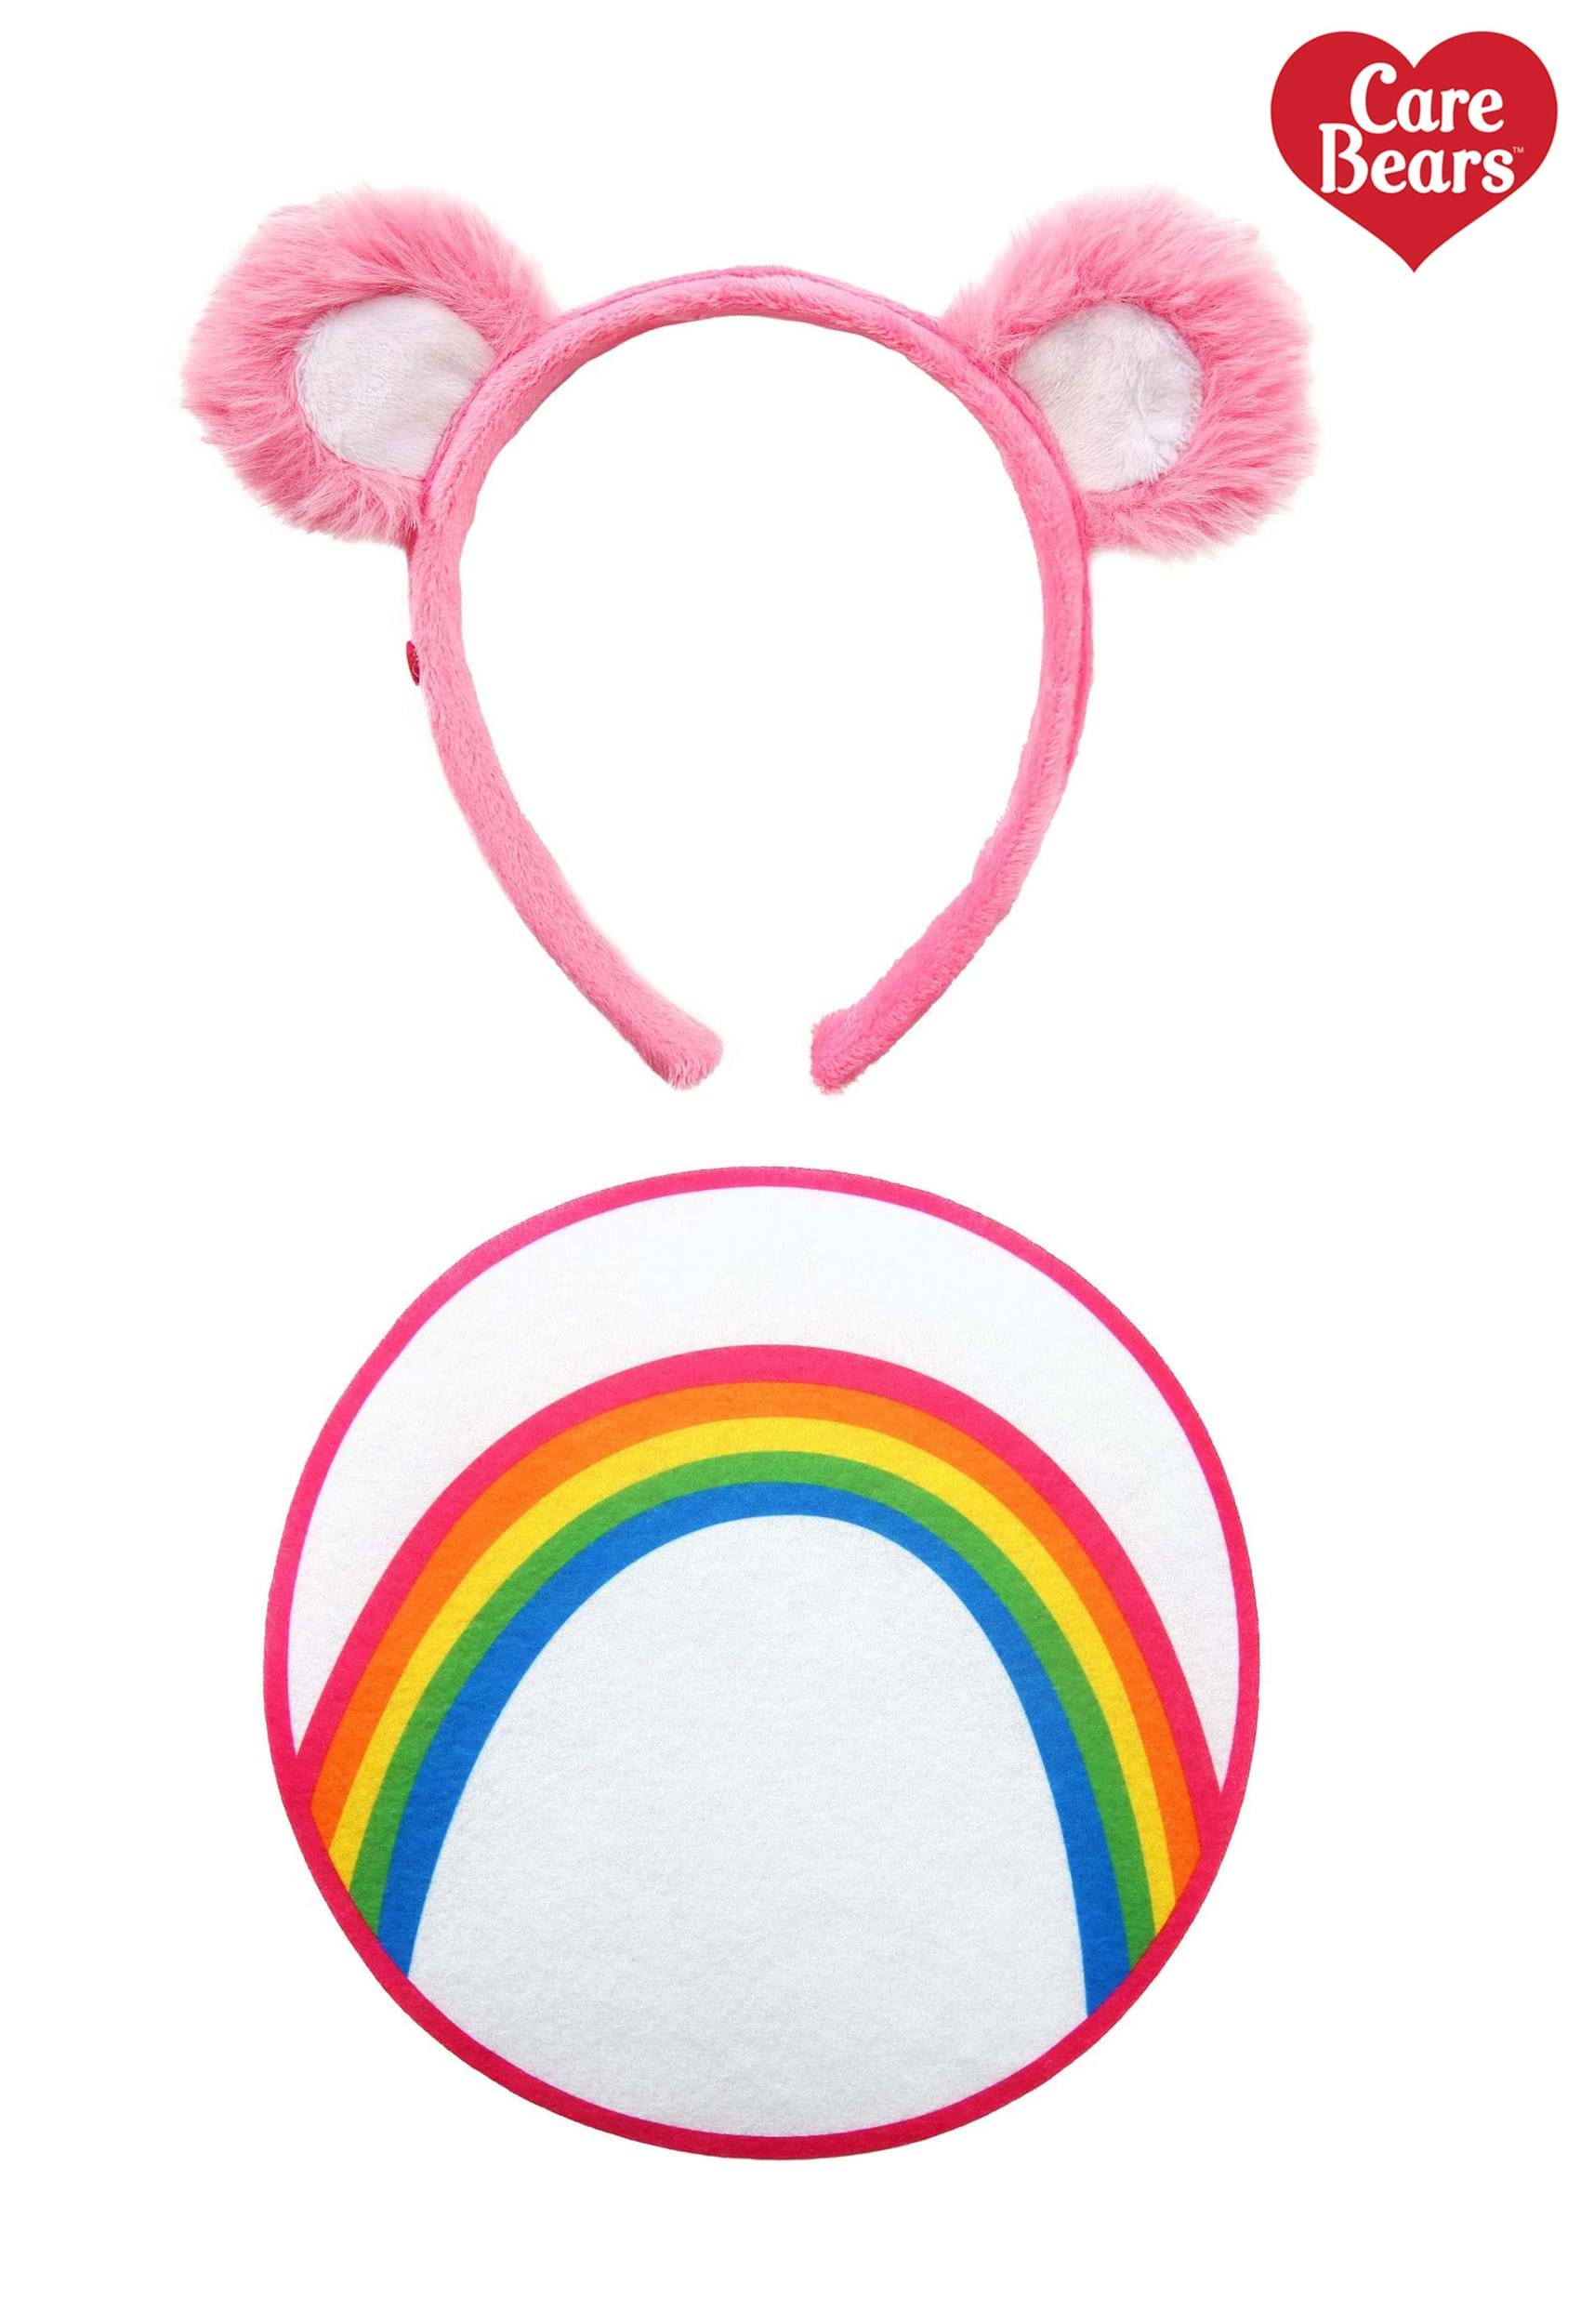 costumes-care-bear-cheer-bear-pink-ears-and-tail-set-with-care-bear